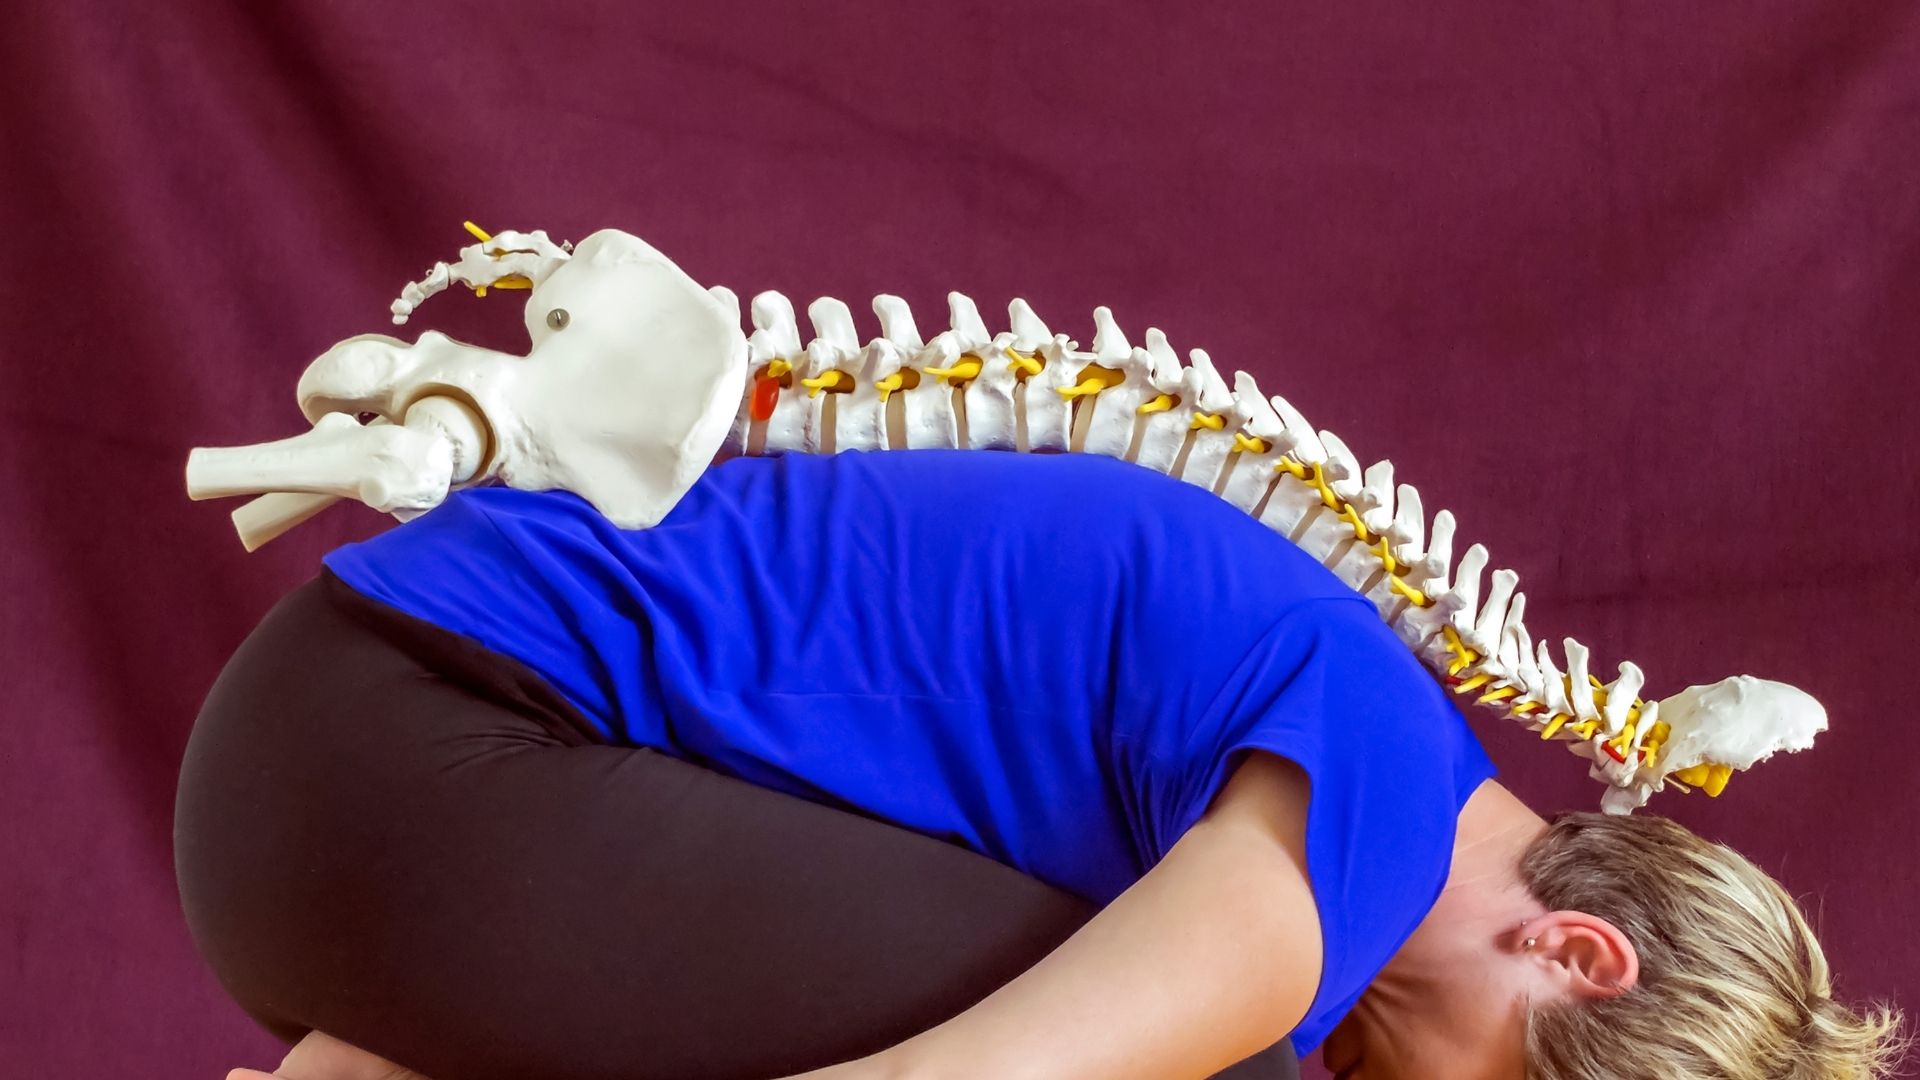 Spinal subluxation may cause pain – or not. When something doesn’t feel right, call the chiropractor!